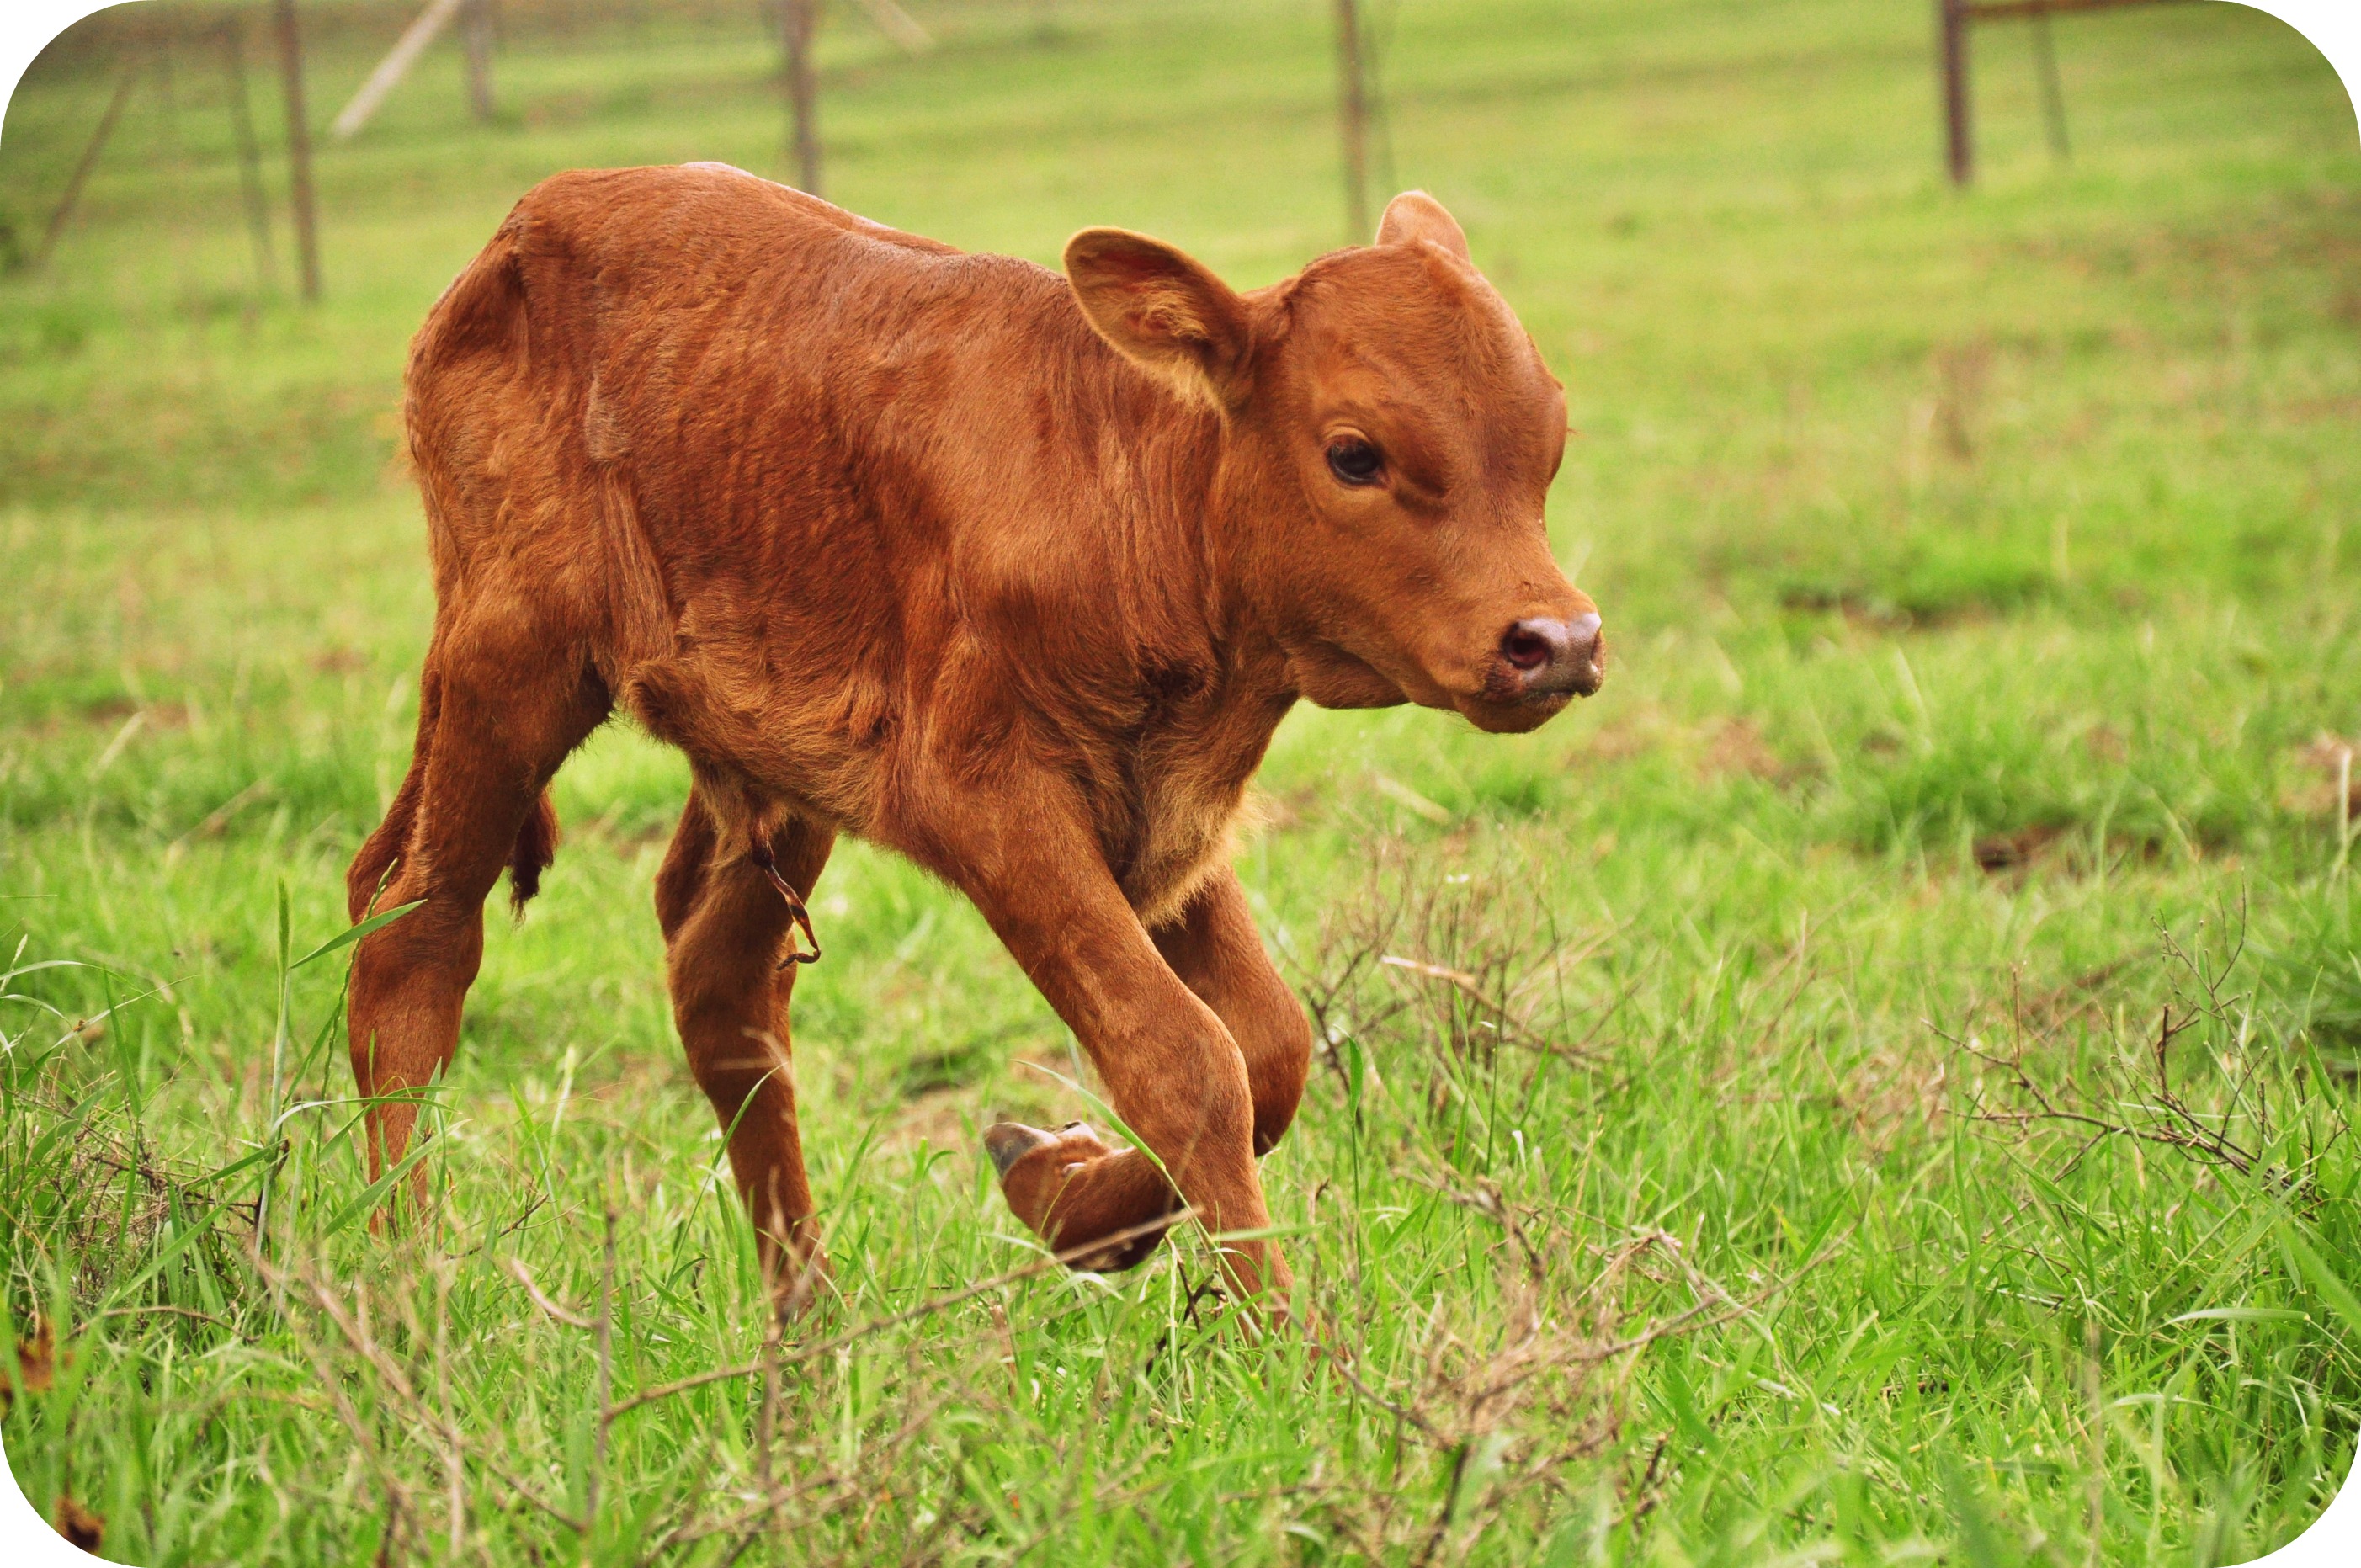 Calf Wallpapers High Quality  Download Free